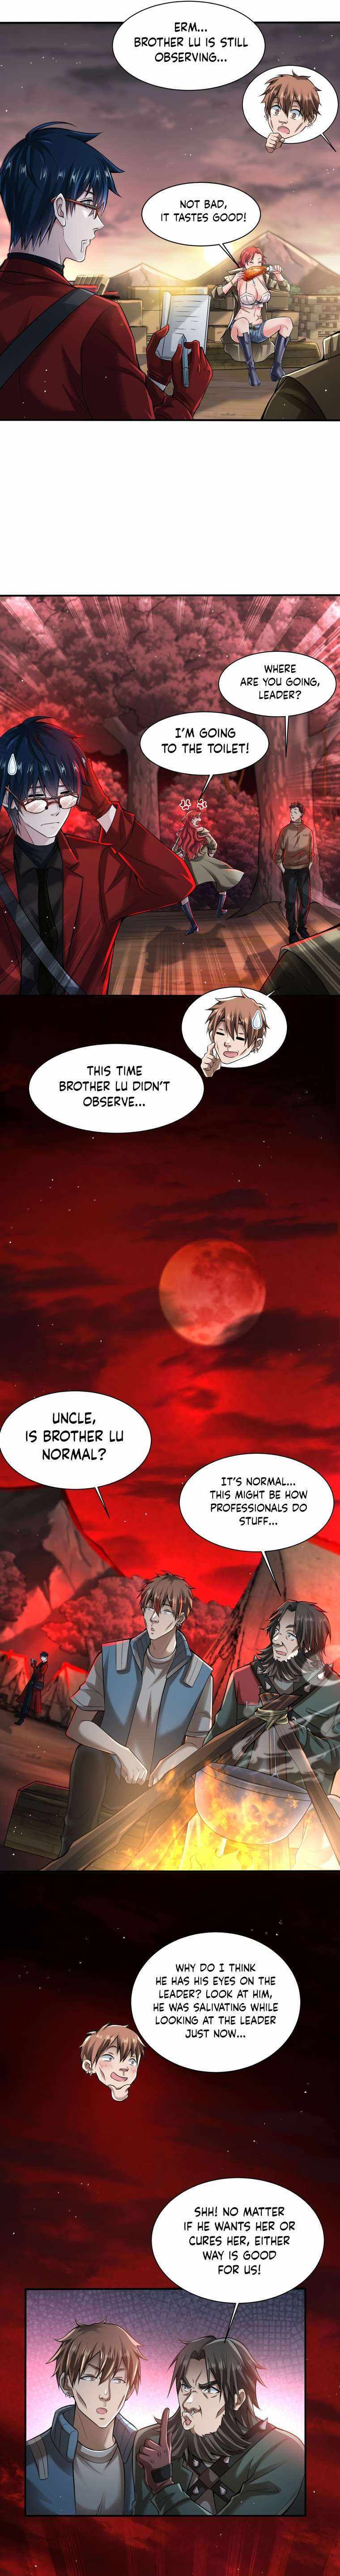 Since The Red Moon Appeared - Page 4